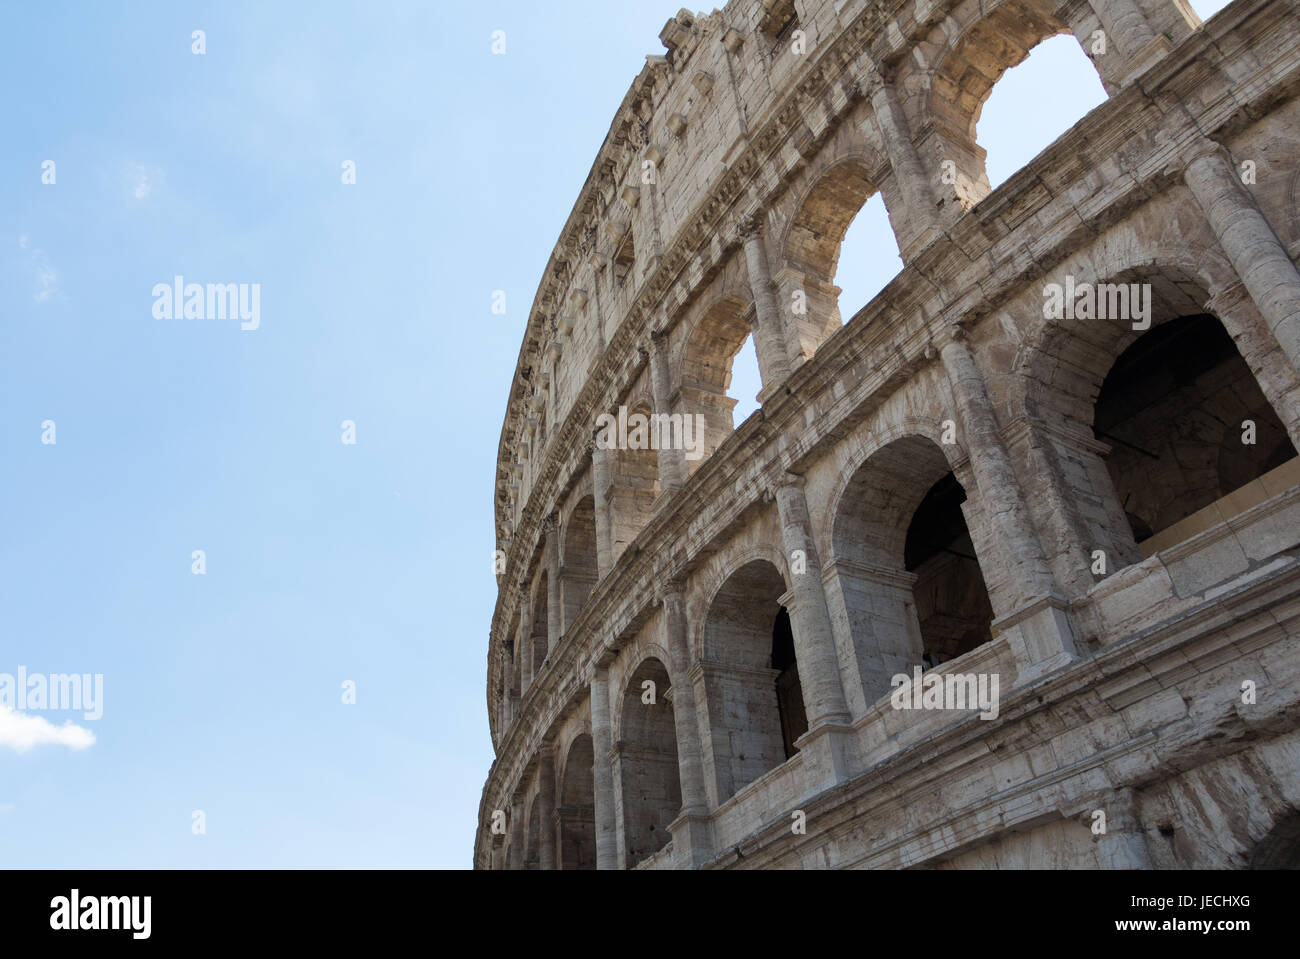 The Magnificent Coliseum - Rome - Italy Stock Photo